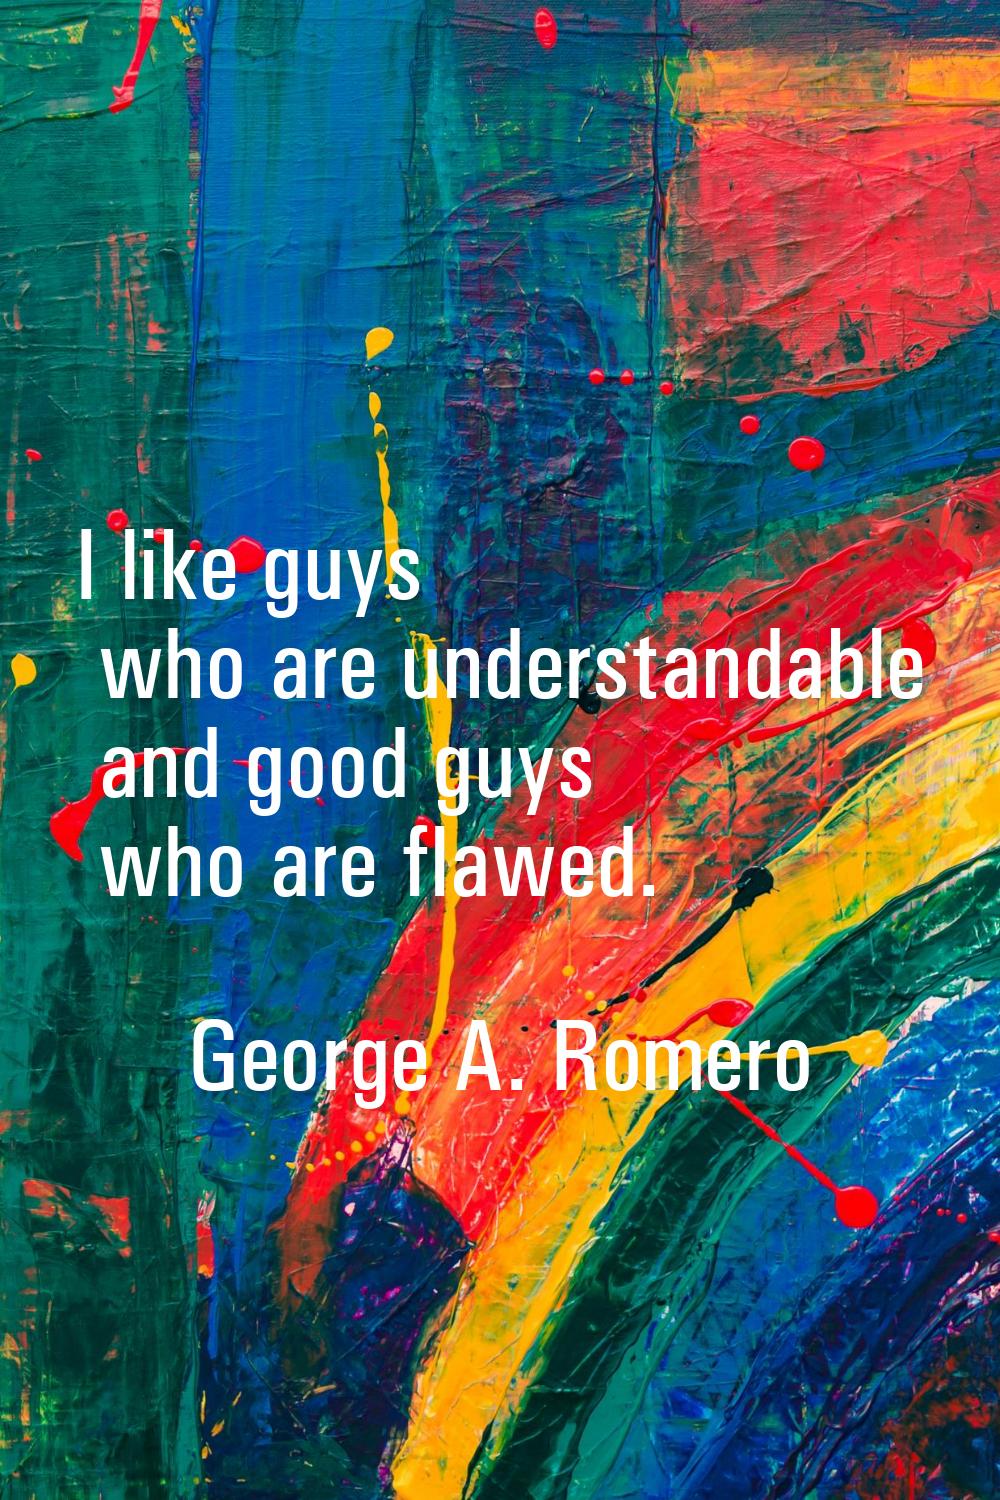 I like guys who are understandable and good guys who are flawed.